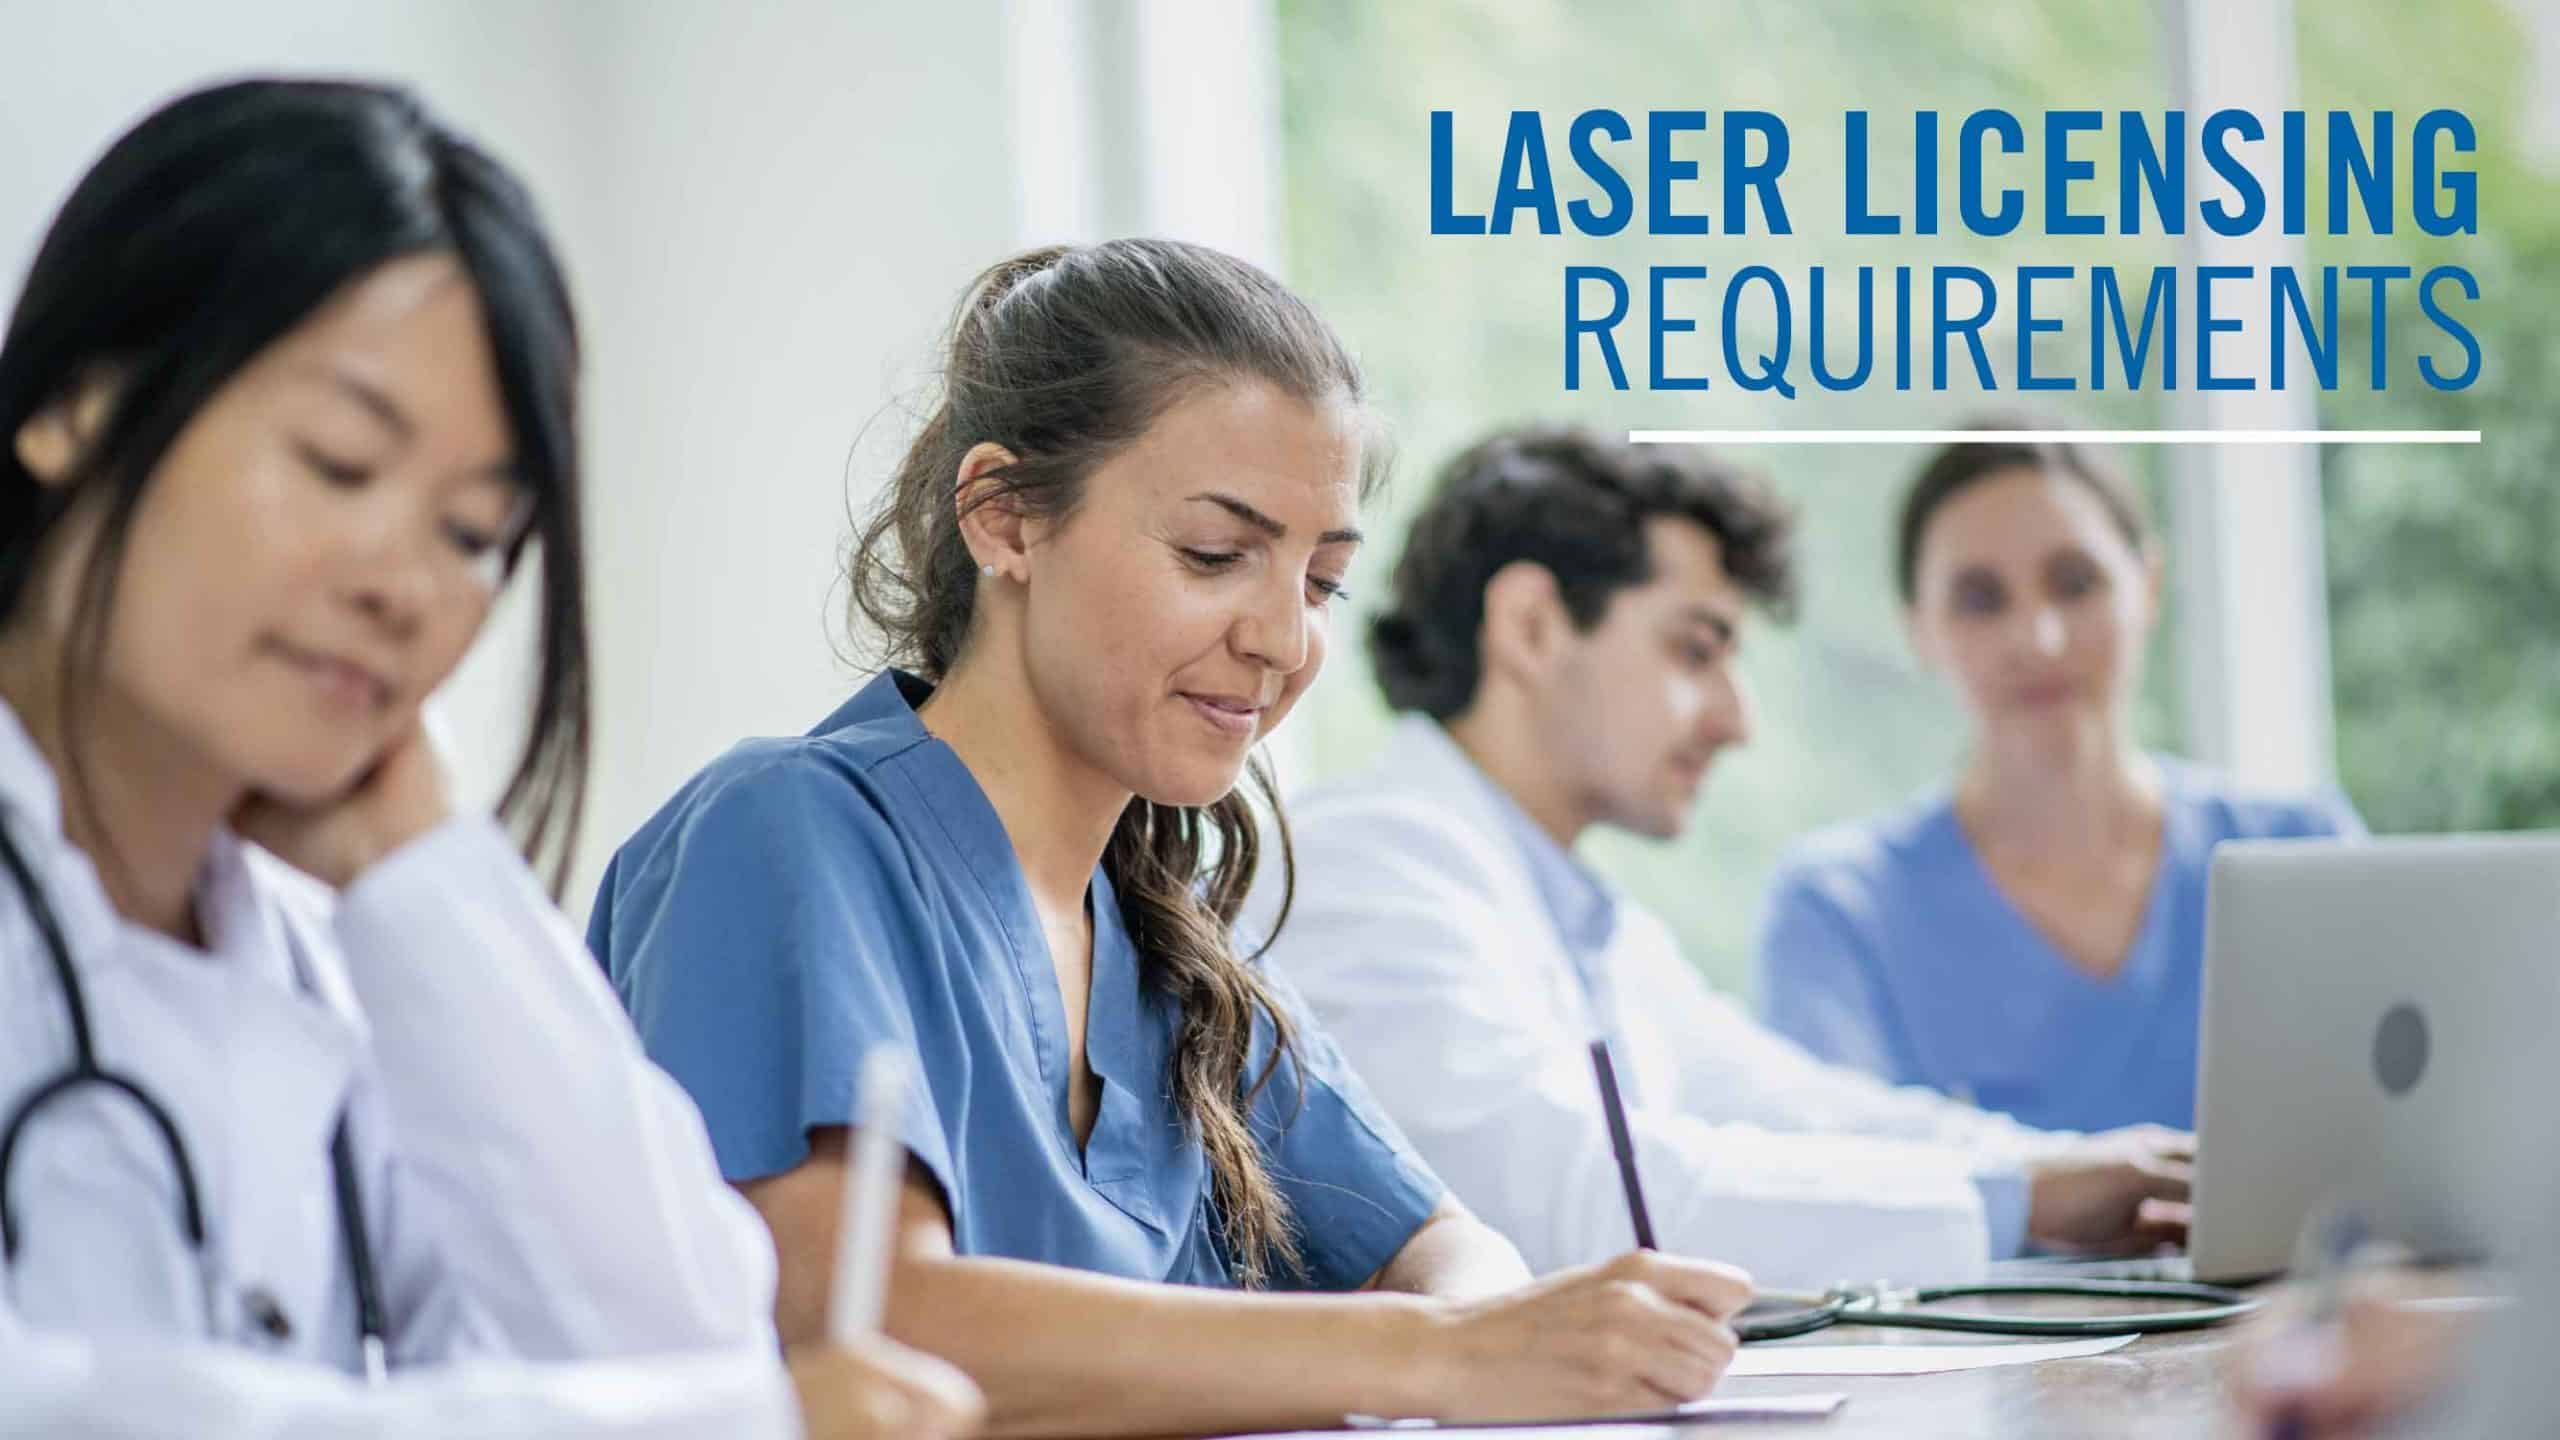 Click the image to learn more about Laser Licensing Requirements